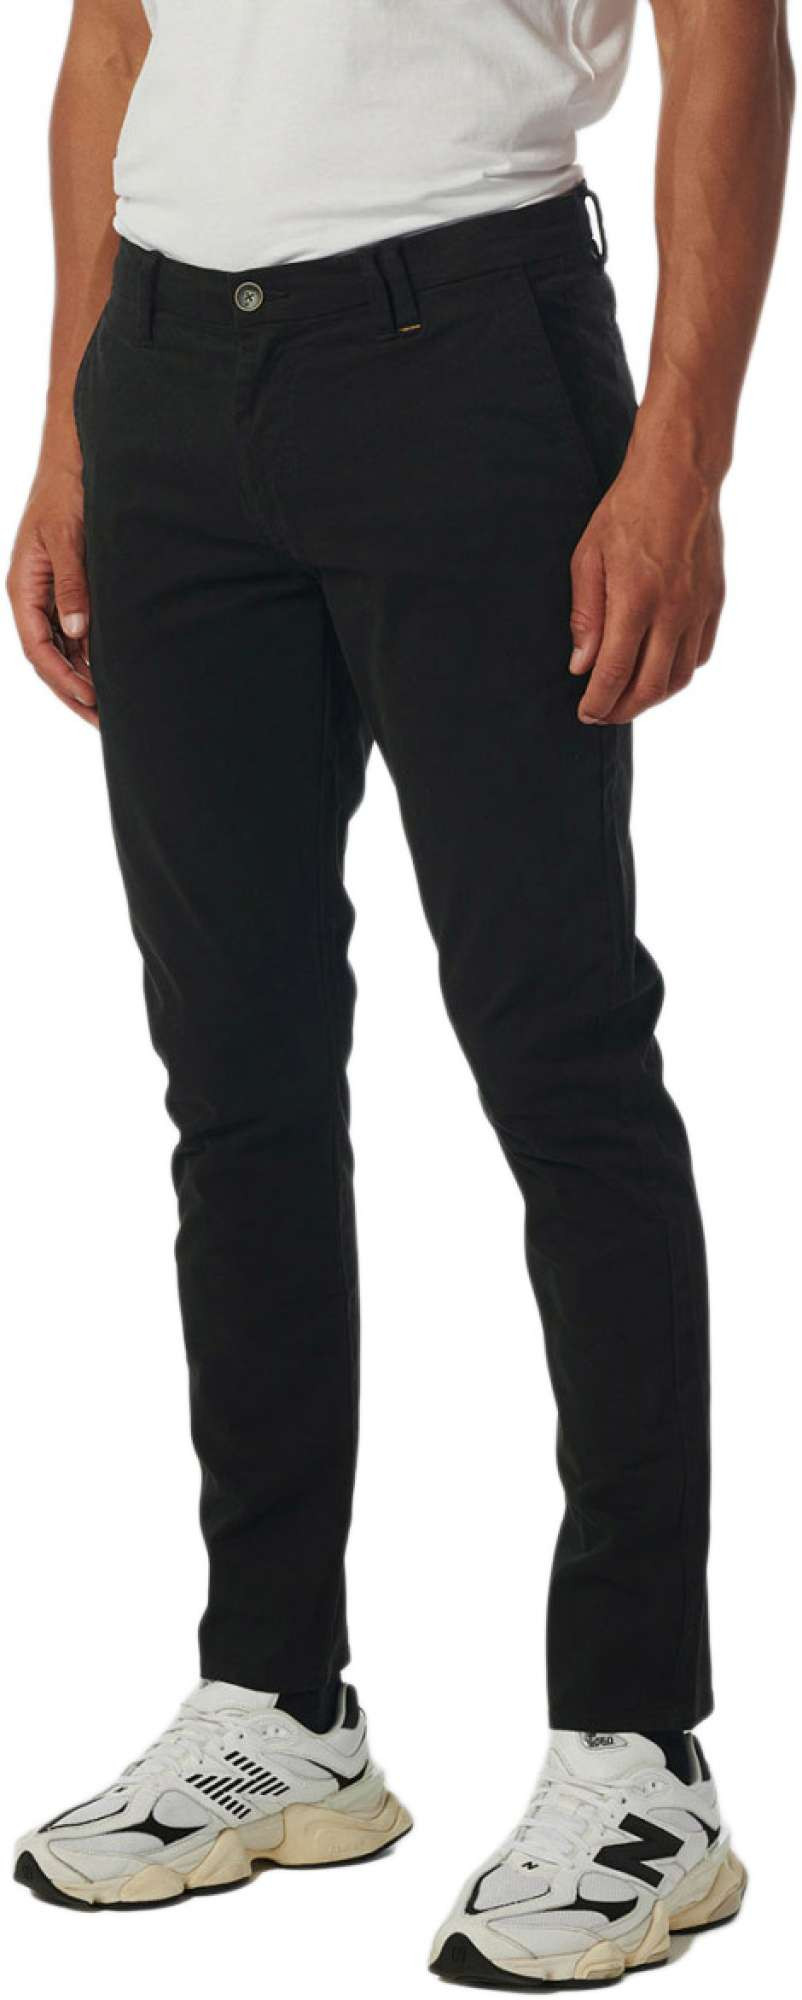 Afbeelding van No Excess Pants chino garment dyed stretch black